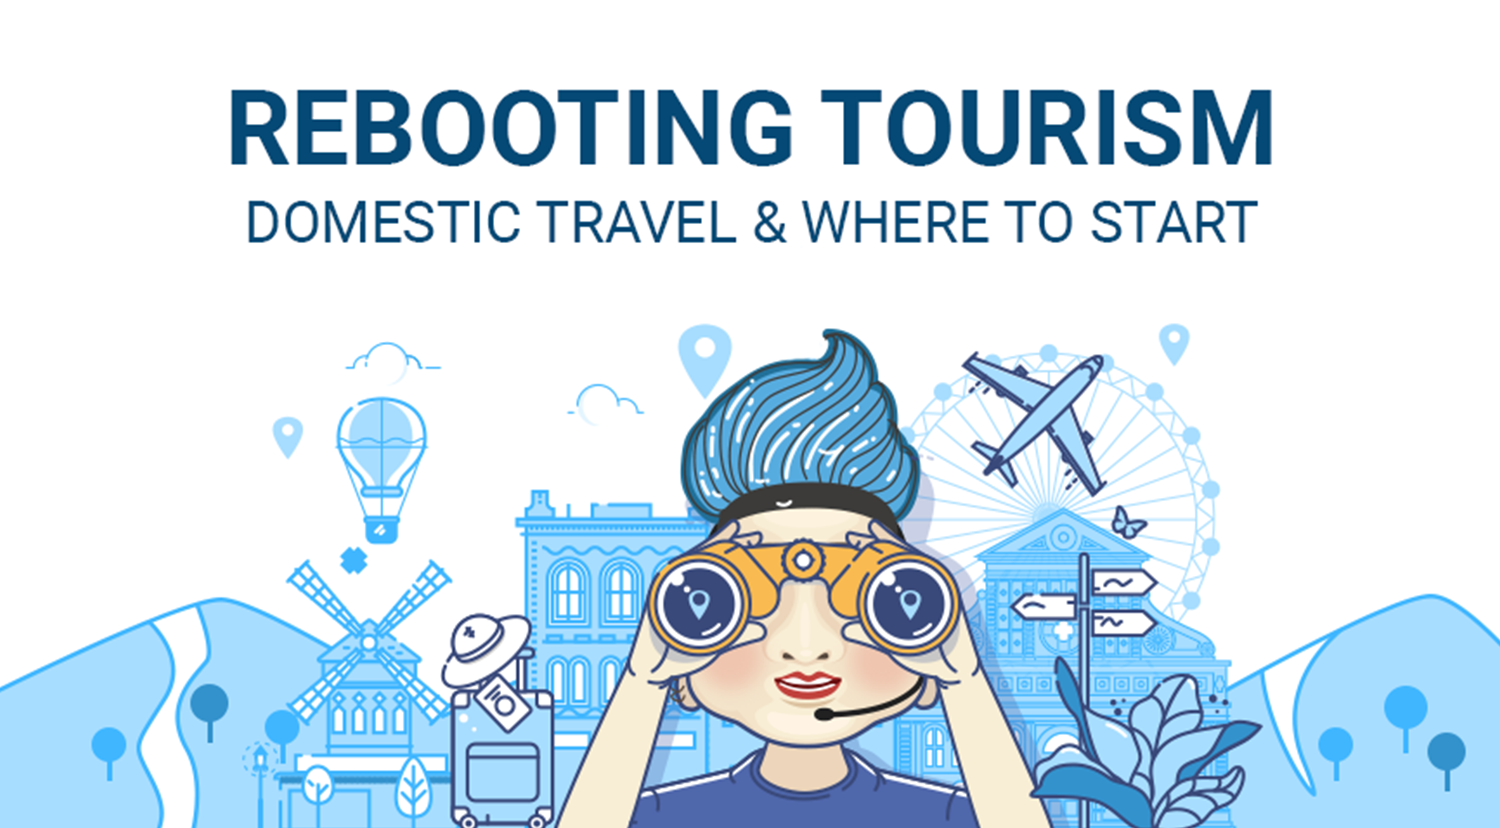 Rebooting Tourism - Domestic Travel & Where To Start